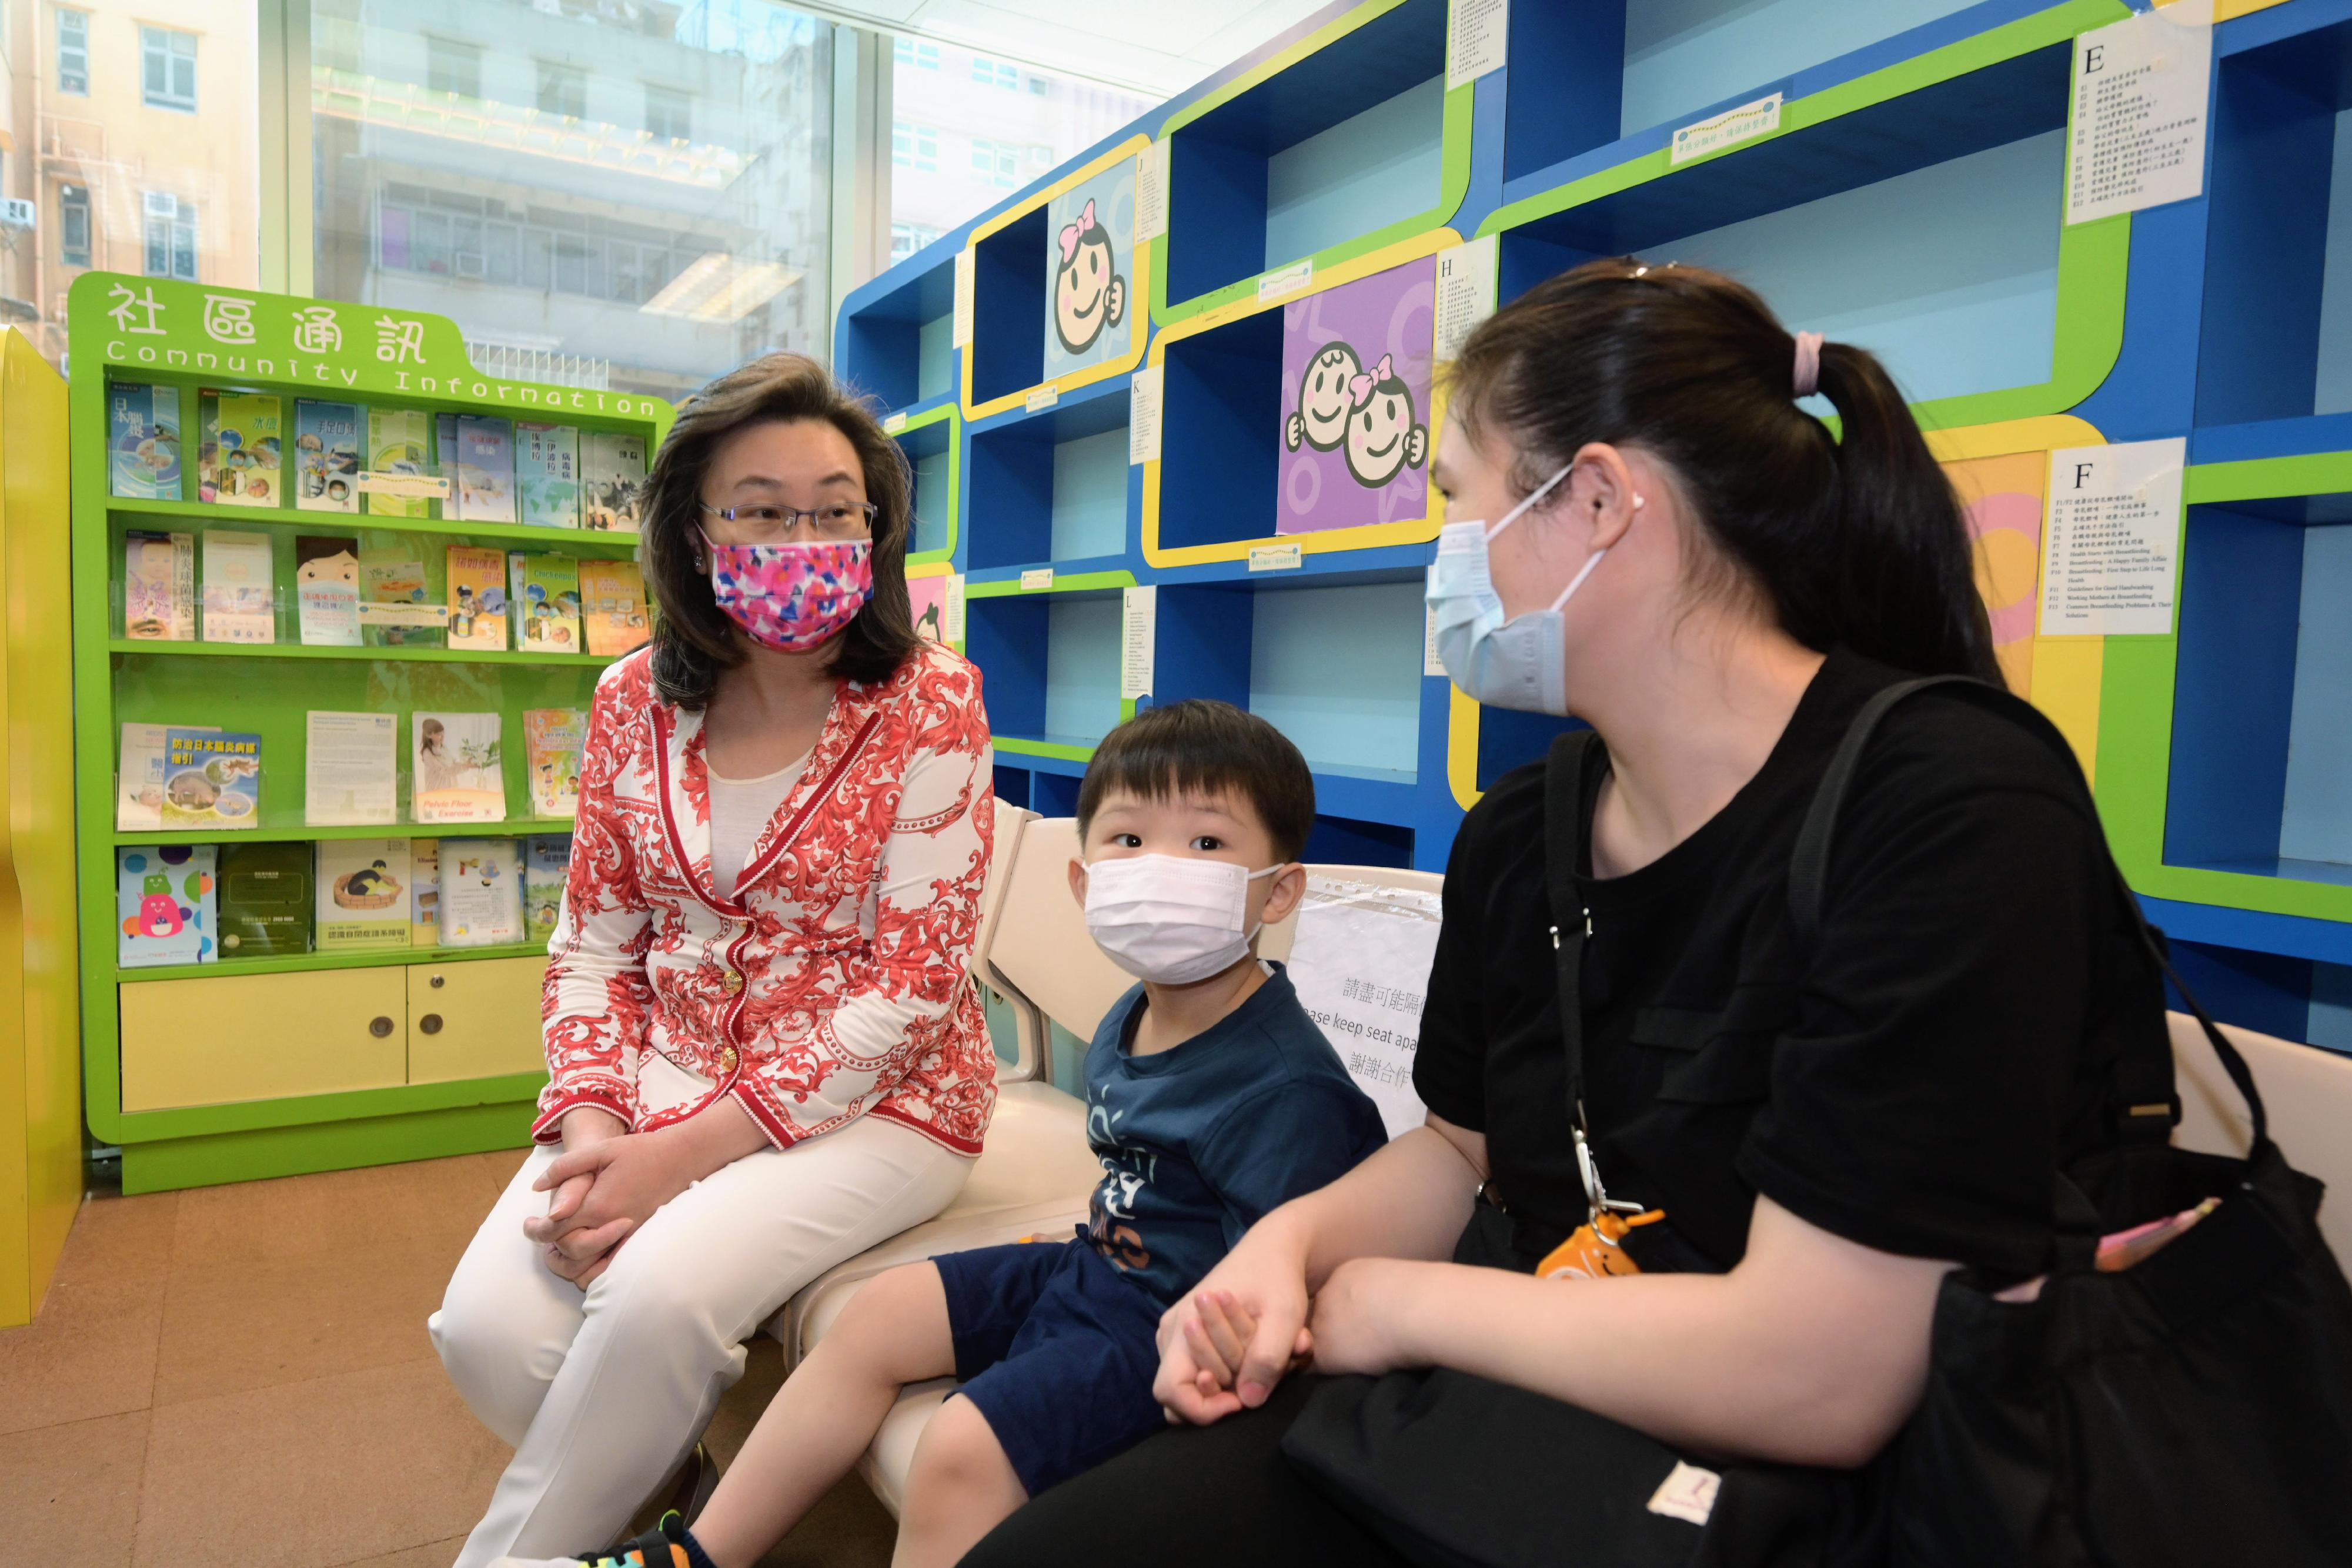 The Secretary for the Civil Service, Mrs Ingrid Yeung, today (August 23) visited West Kowloon Maternal and Child Health Centre to learn about the arrangements of providing a COVID-19 vaccination service for children there. Photo shows Mrs Yeung (first left) chatting with the parent of a young child to hear her views on COVID-19 vaccination for young children.